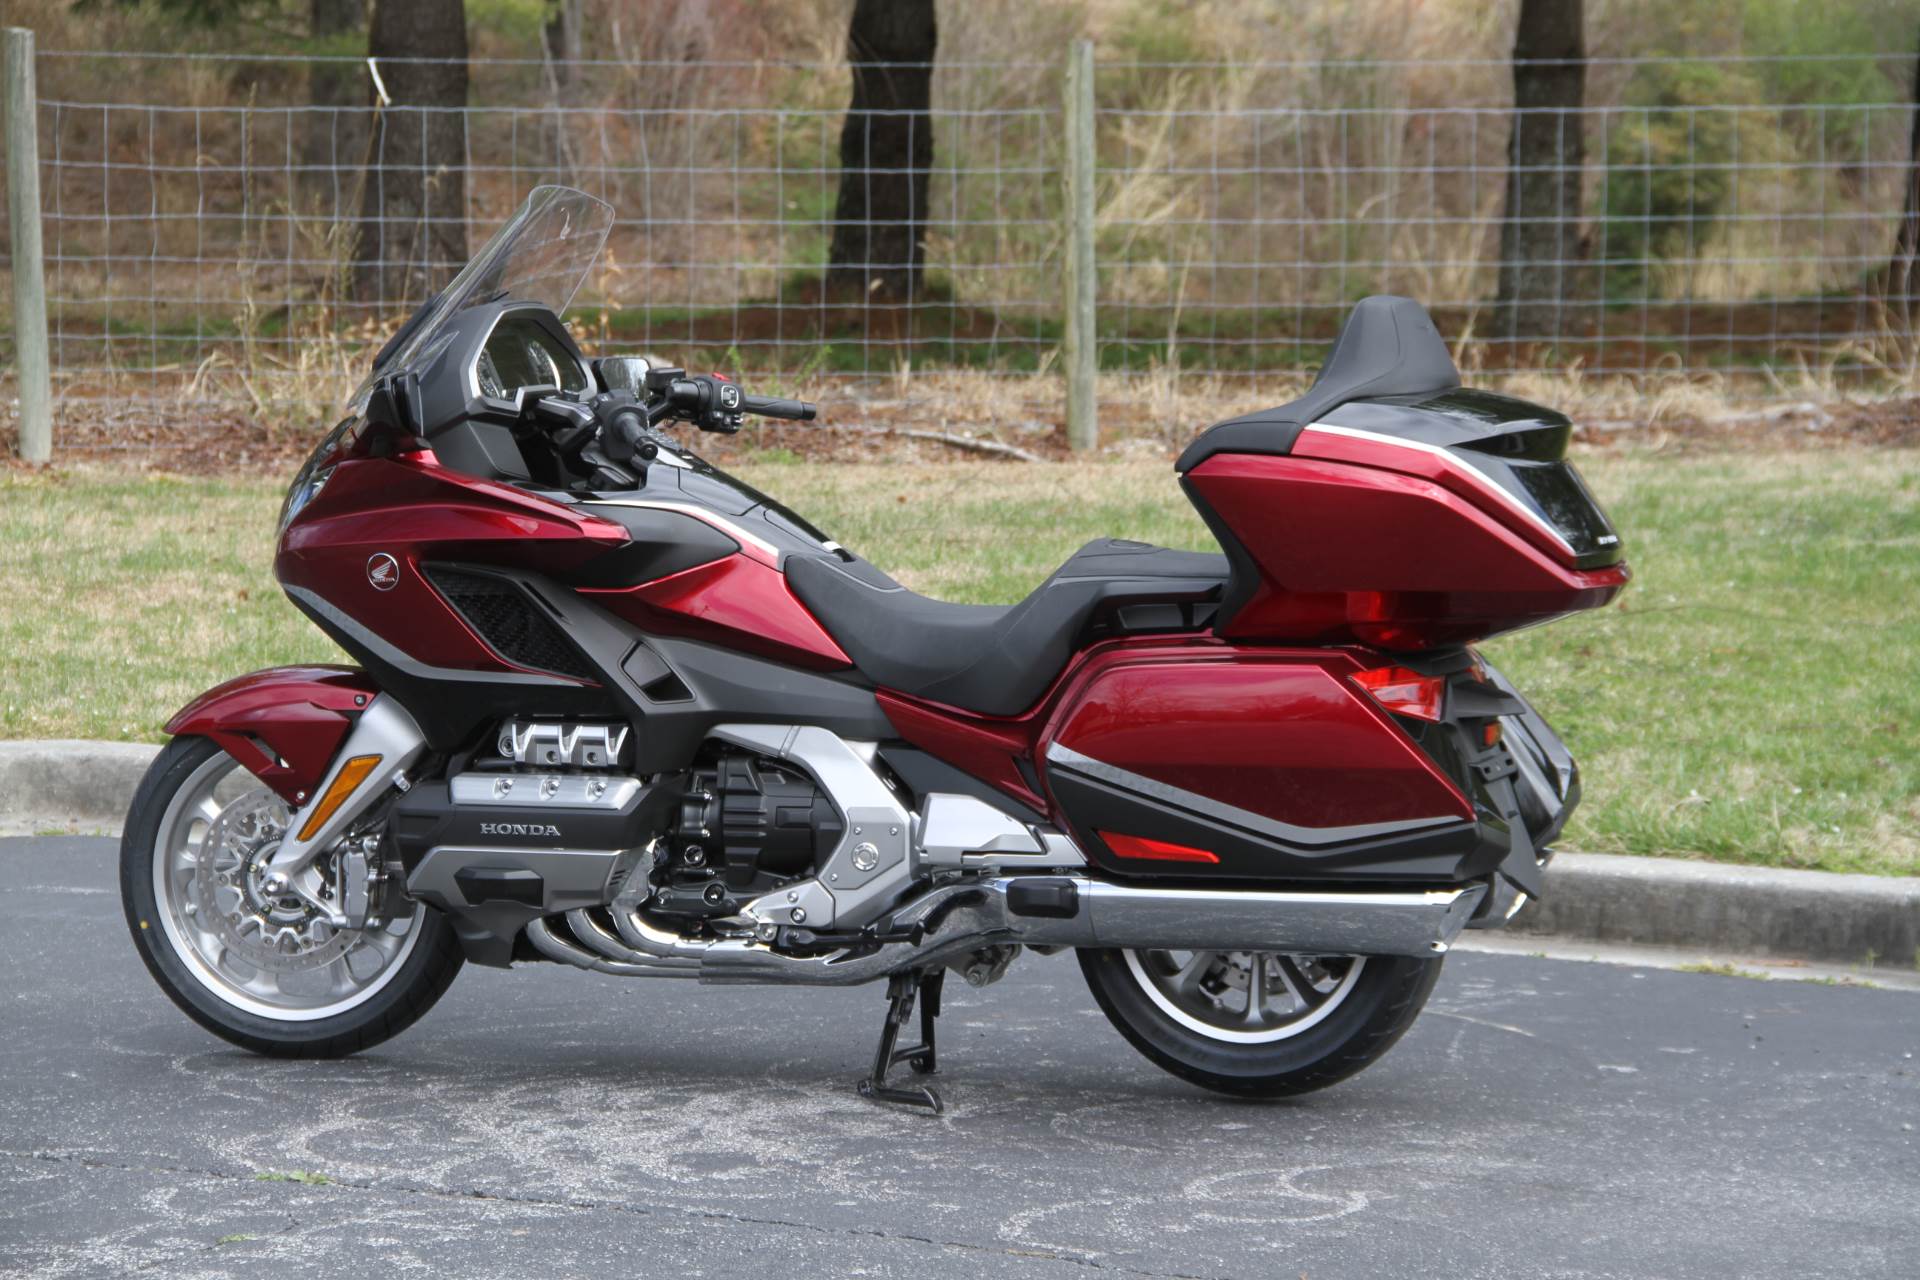 New 2021 Honda Gold Wing Tour Automatic Dct Motorcycles In Hendersonville Nc Stock Number 254368